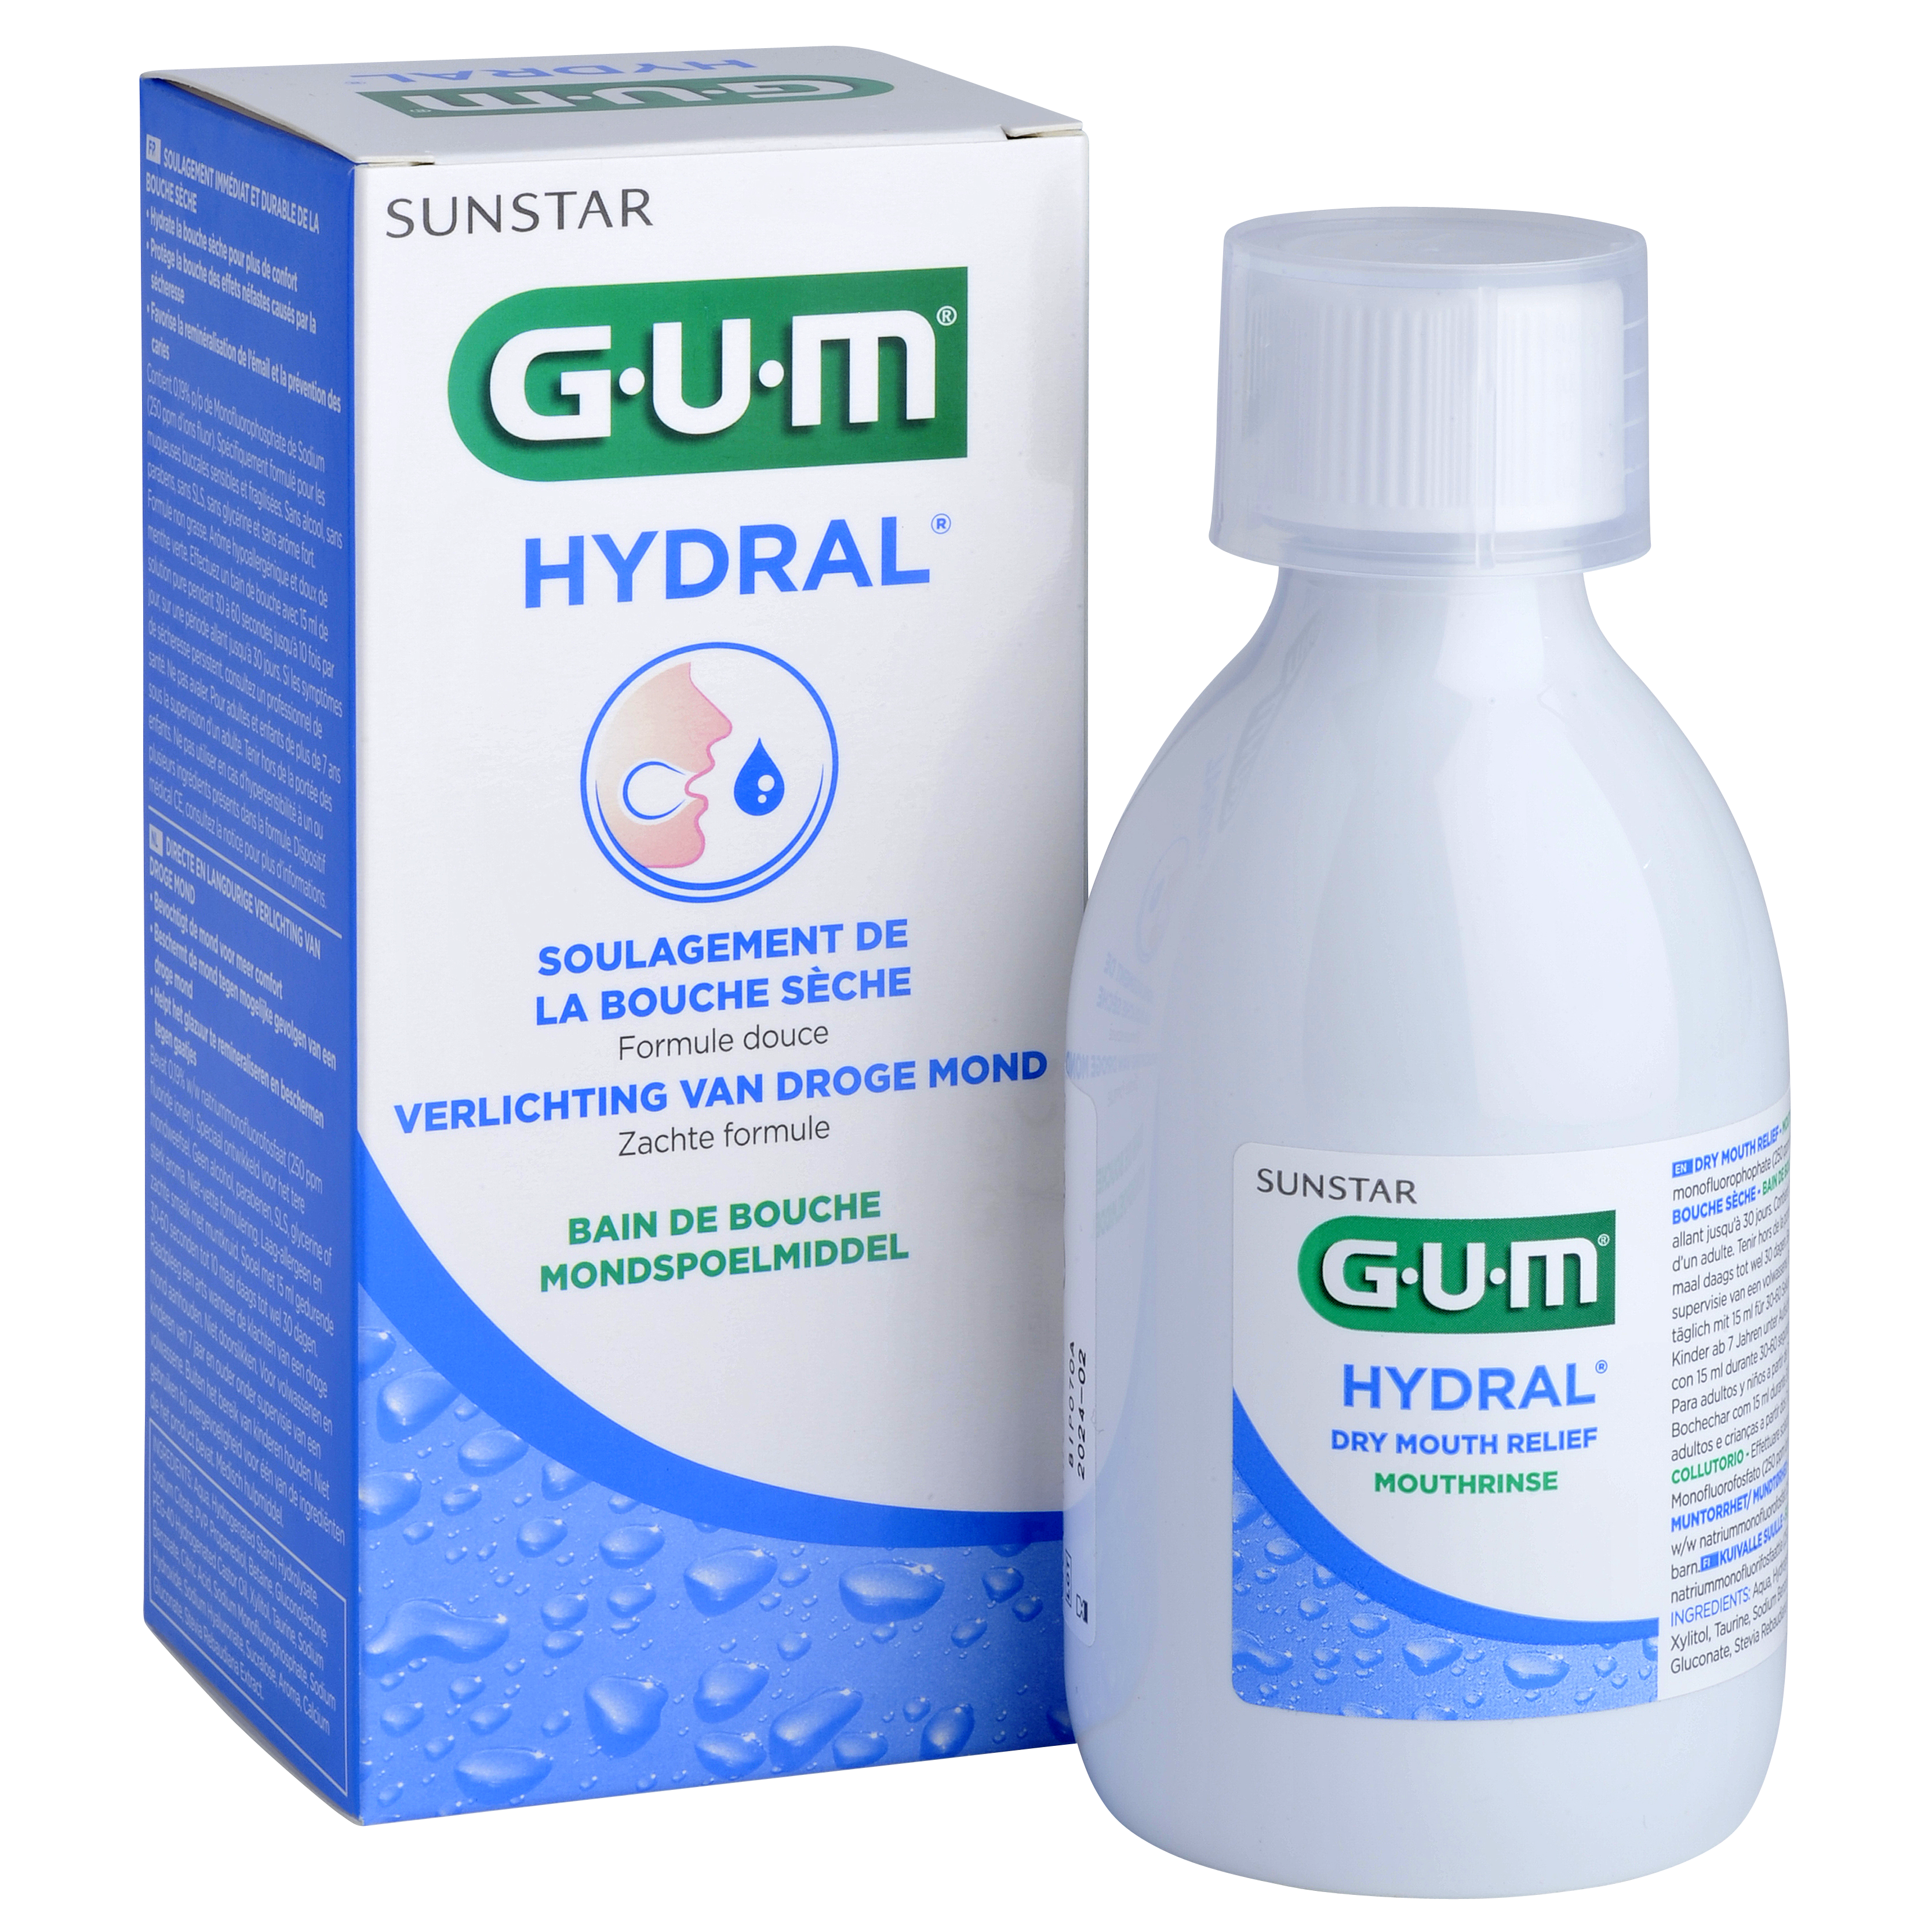 P6030-FR-NL-GUM-HYDRAL-Mouthrinse-300ml-Box-Bottle.png